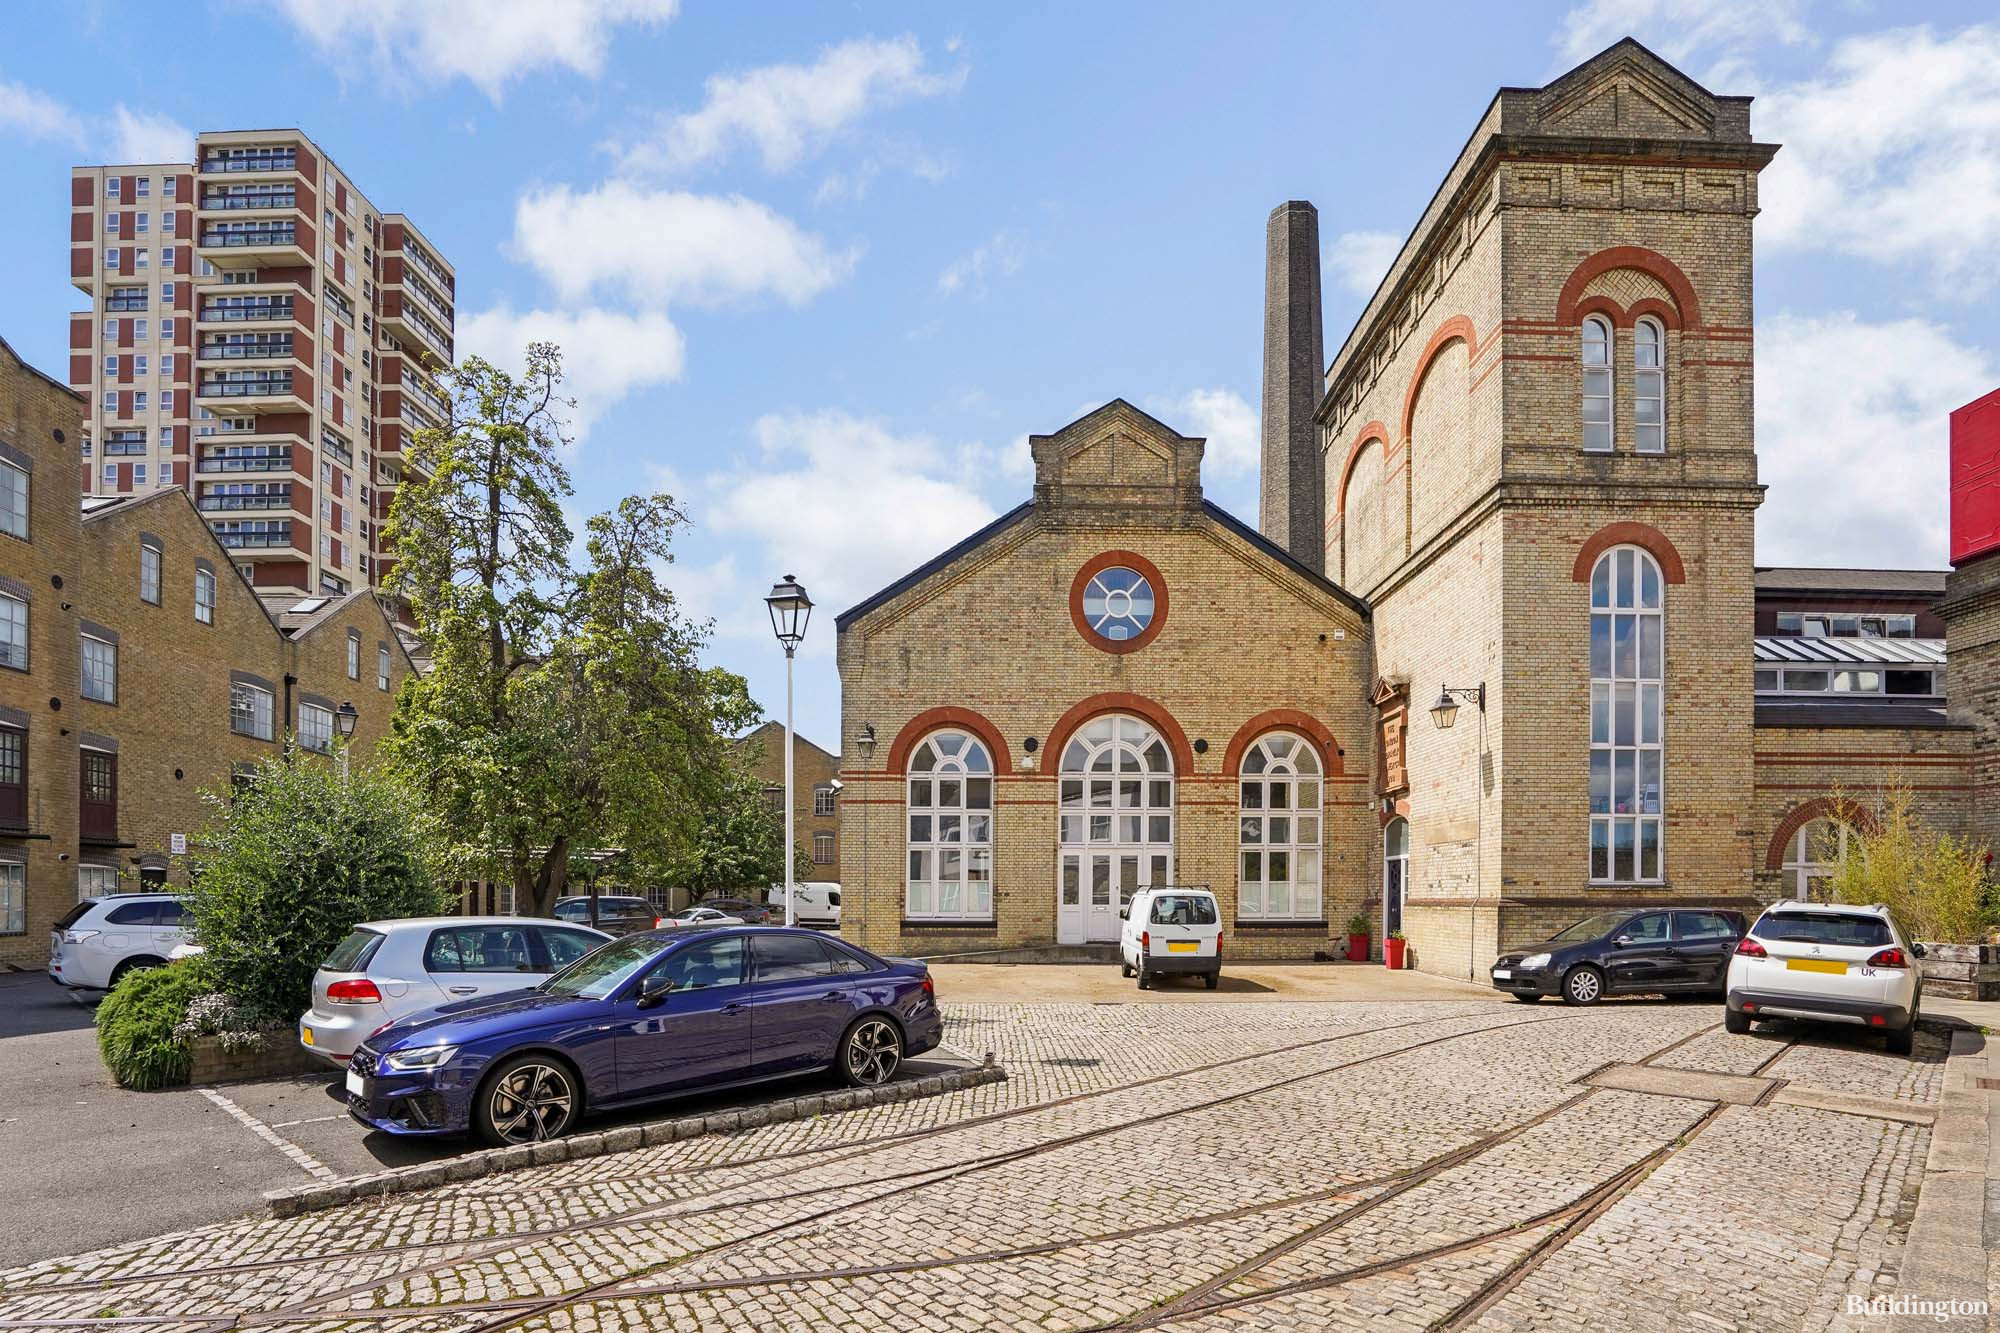 Grade II listed Pump House building on Rentworth Street in London SE16. The mezzanine apartment is offered for sale by Andrerson Rose in Summer 2023.